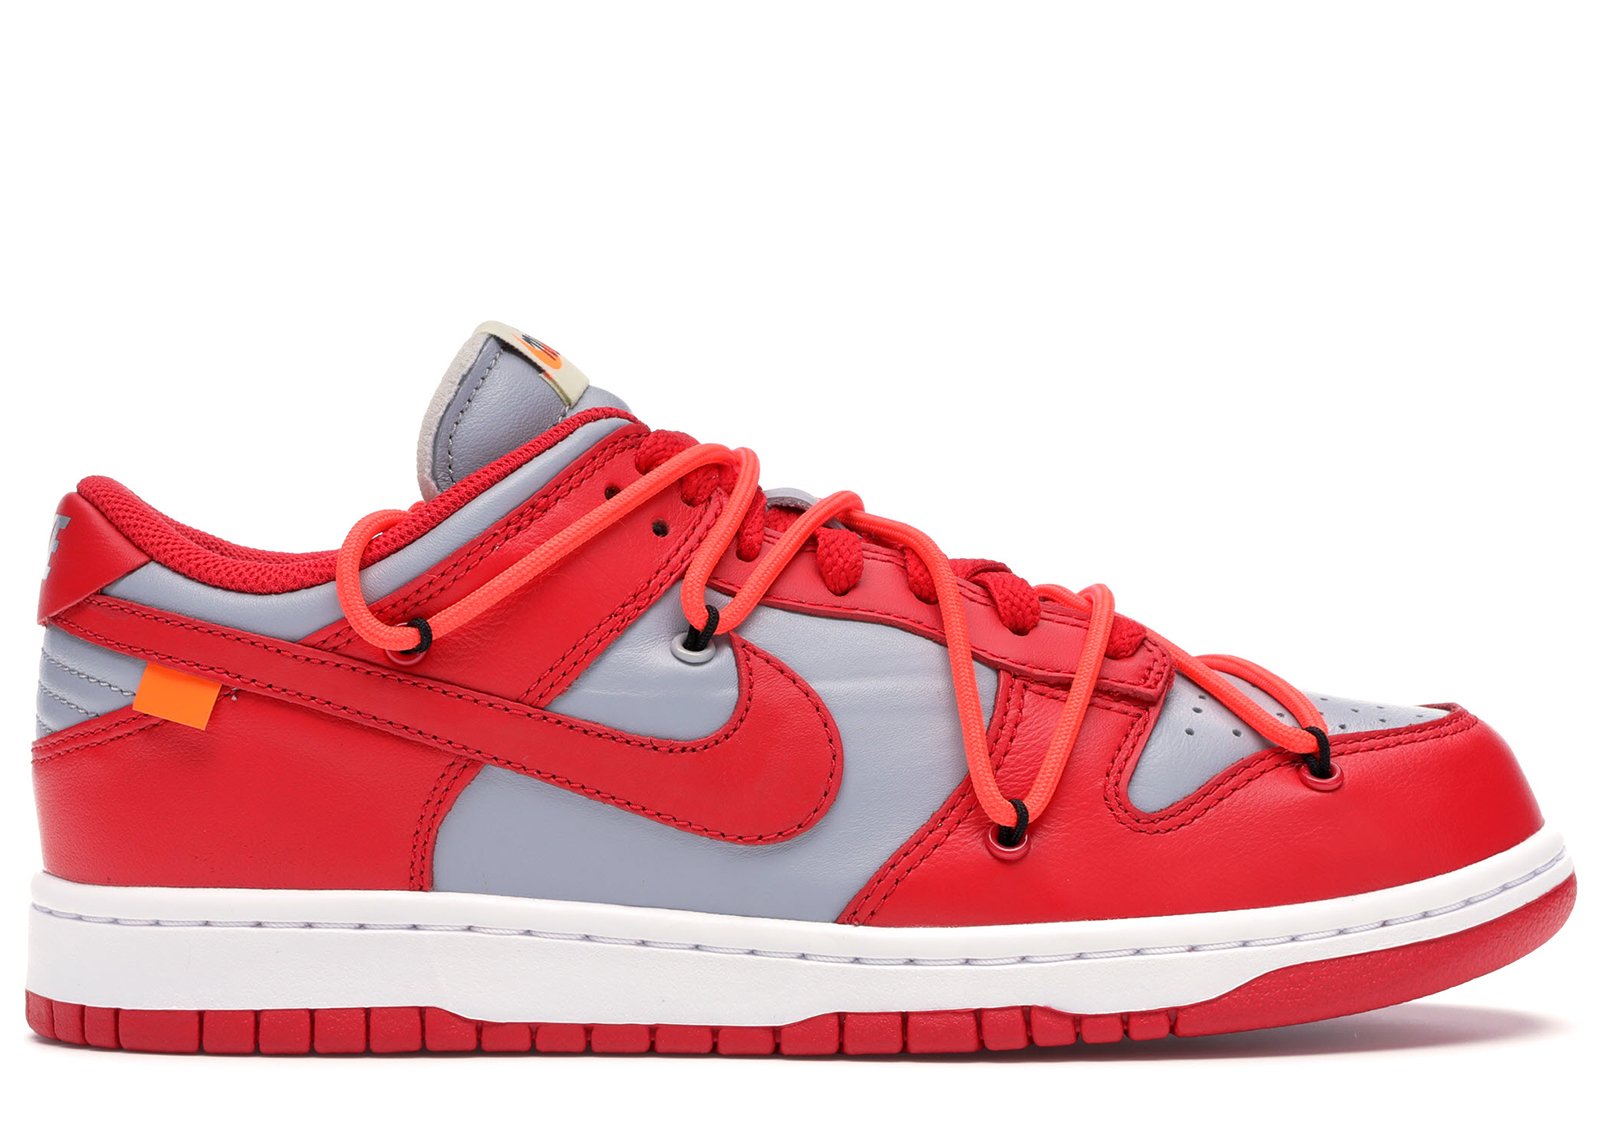 Nike Dunk Low Off-White University Red sneakers